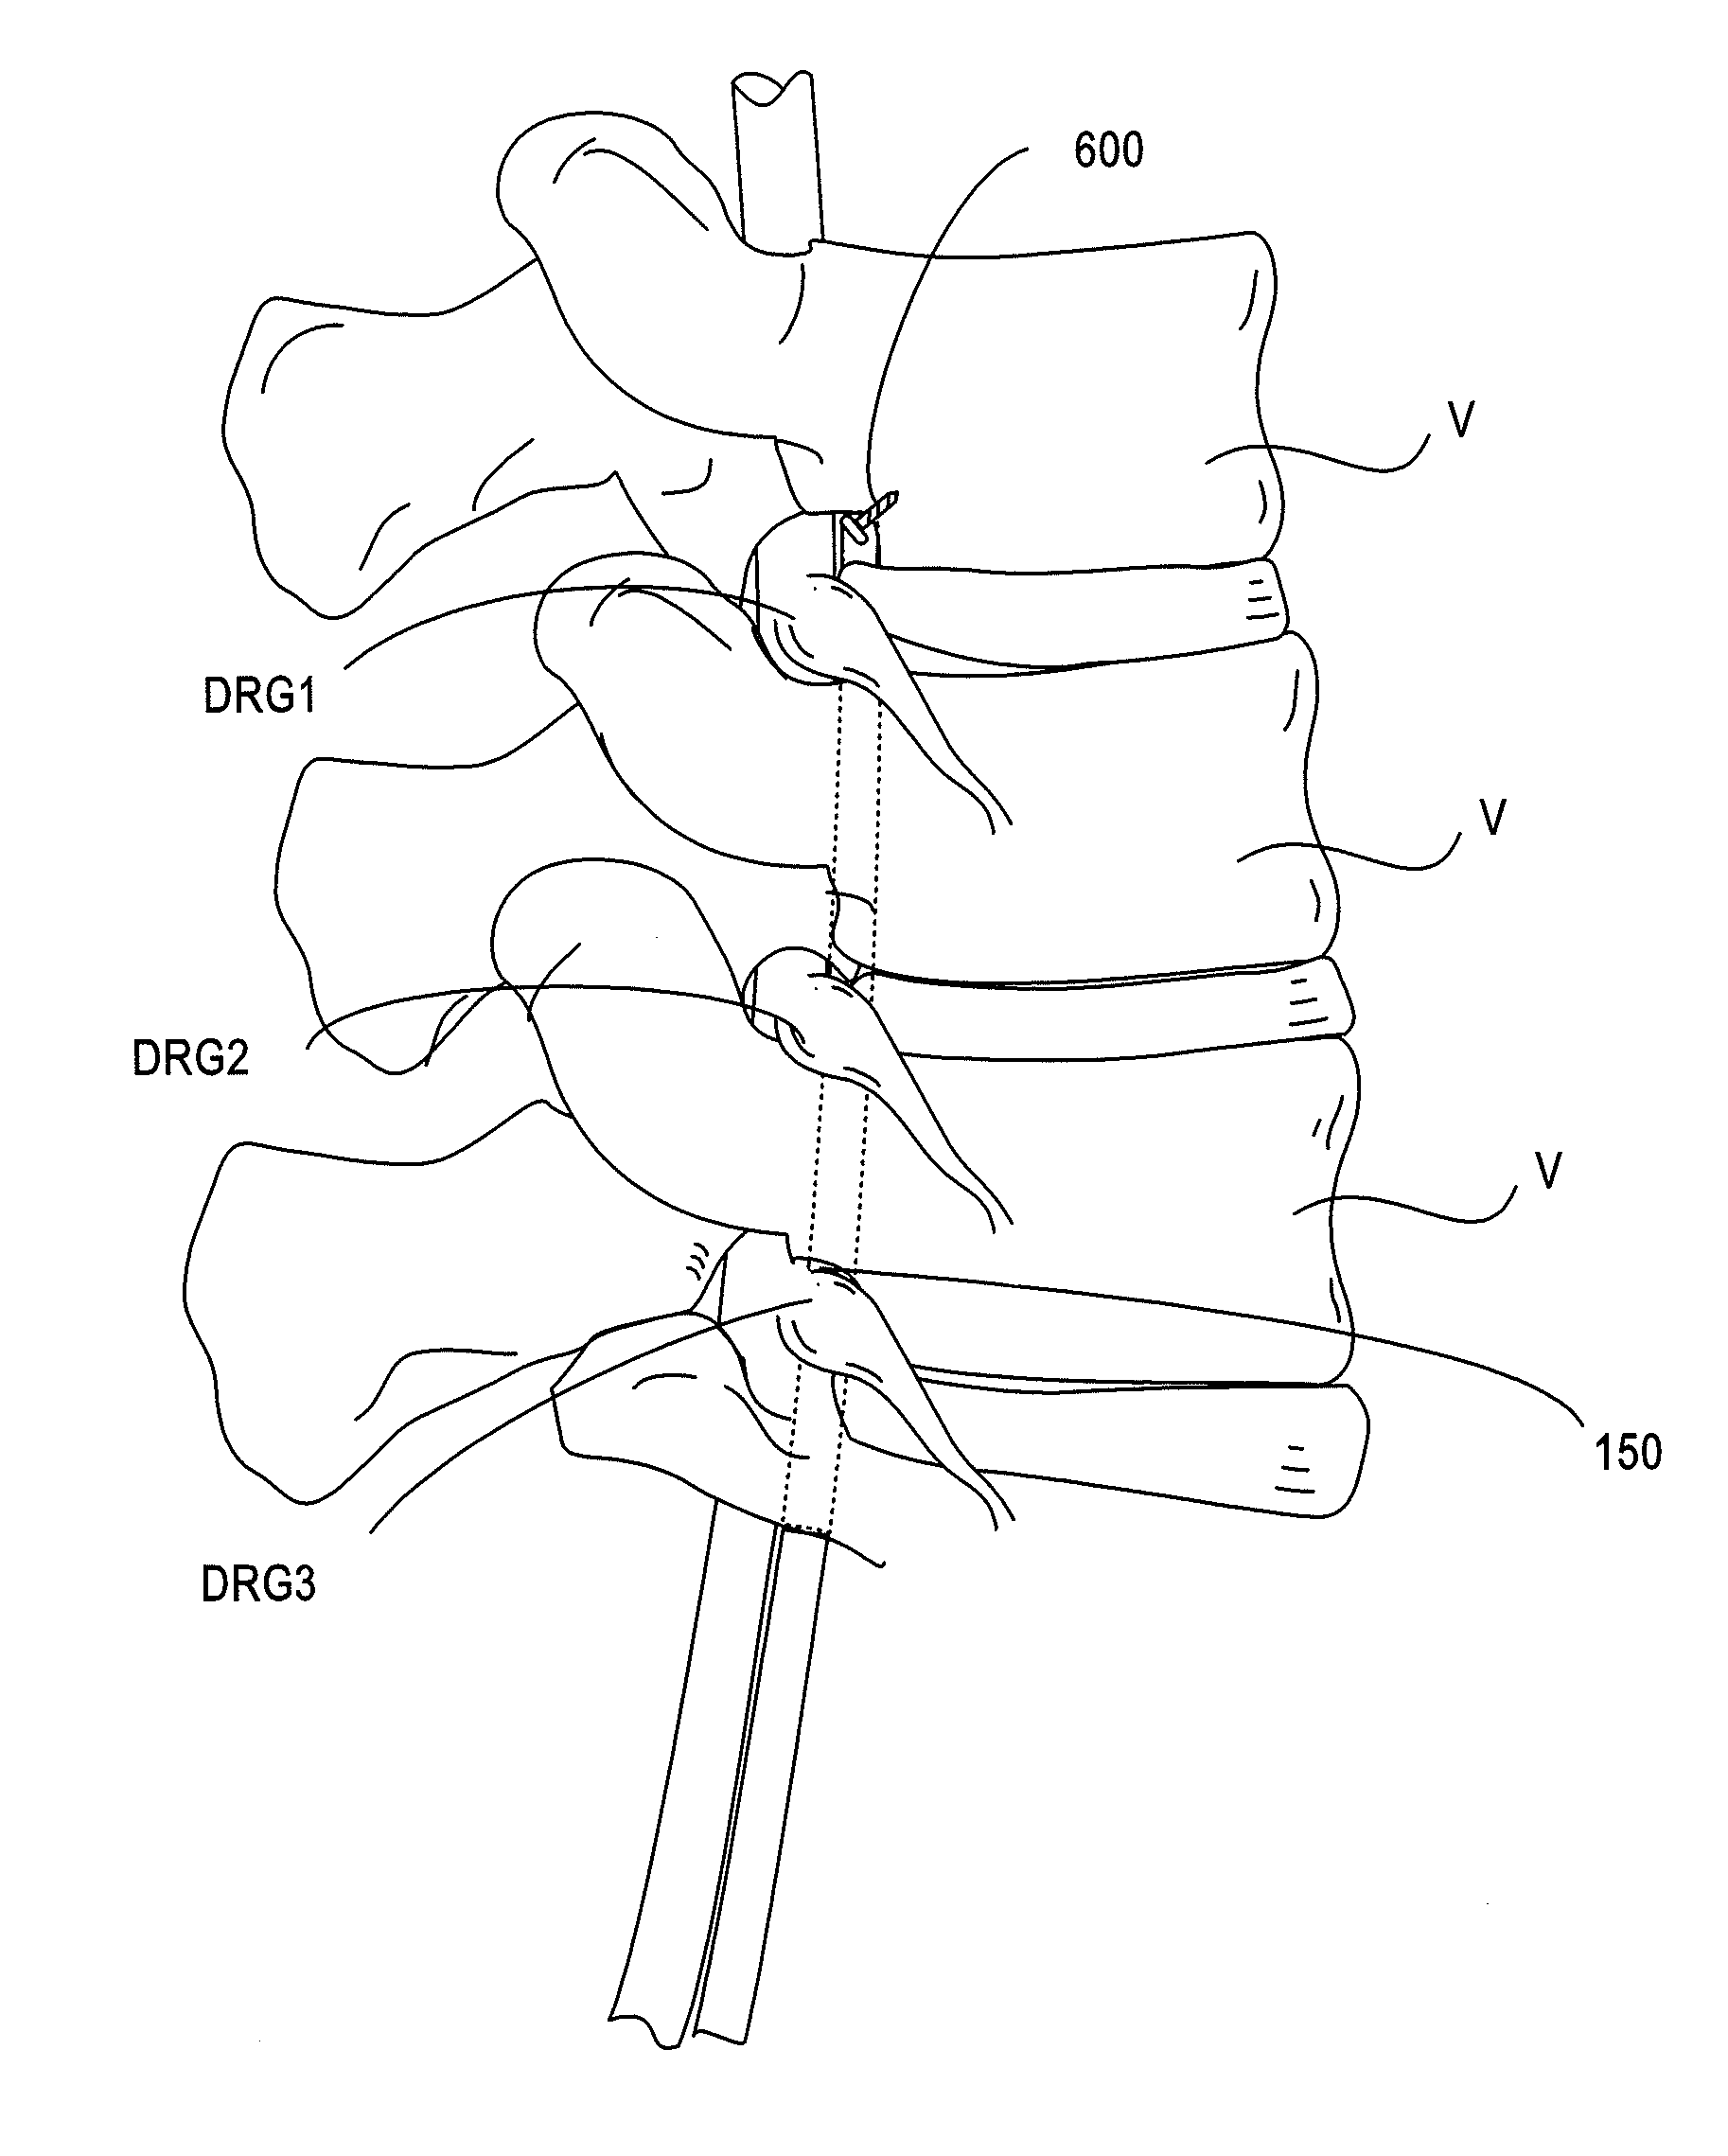 Hard tissue anchors and delivery devices